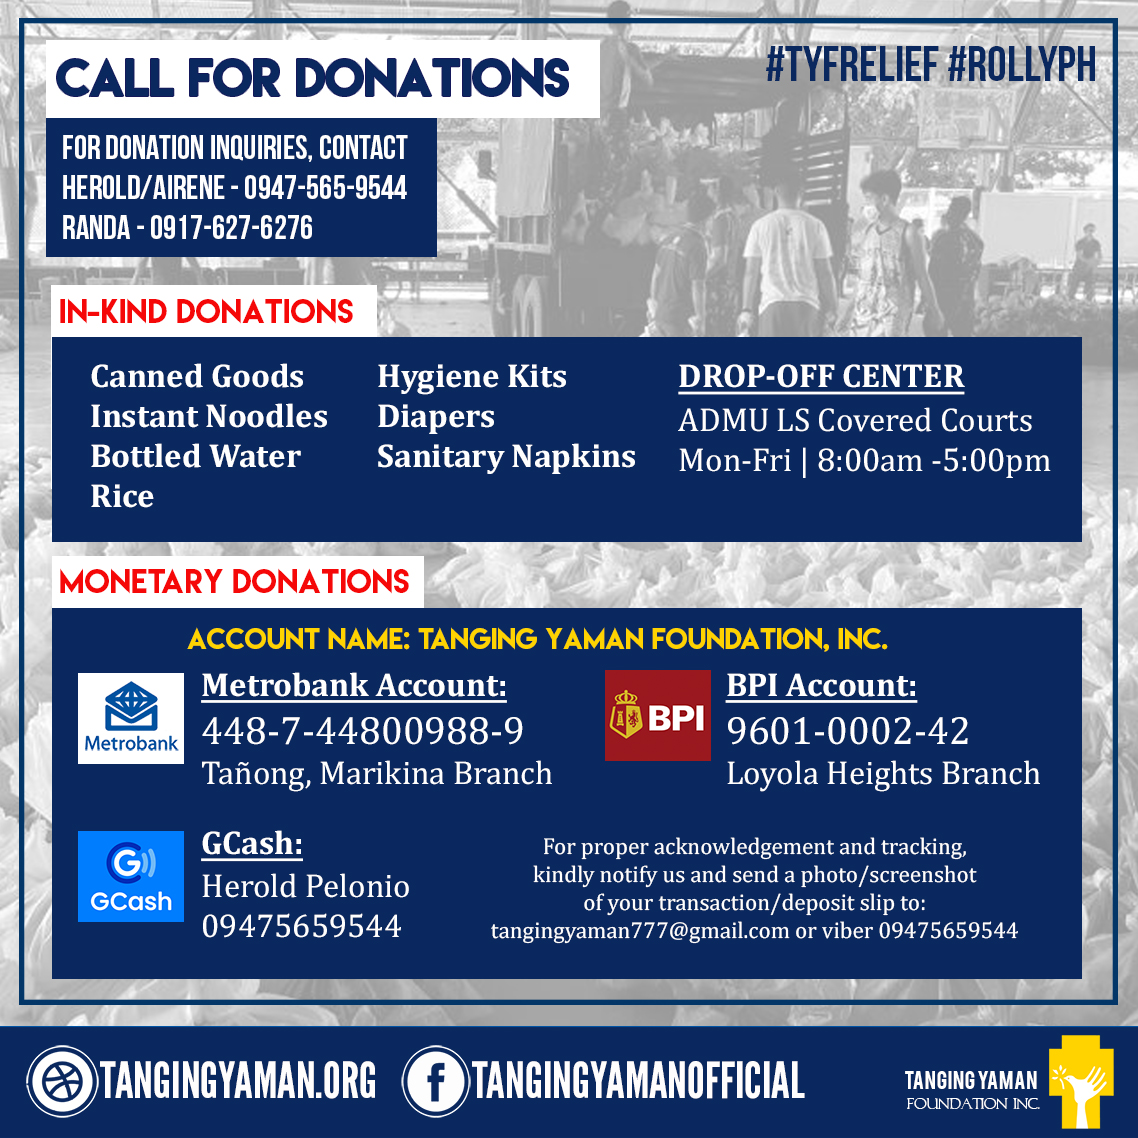 CALL_FOR_DONATIONS_ROLLYPH_for_website.jpg